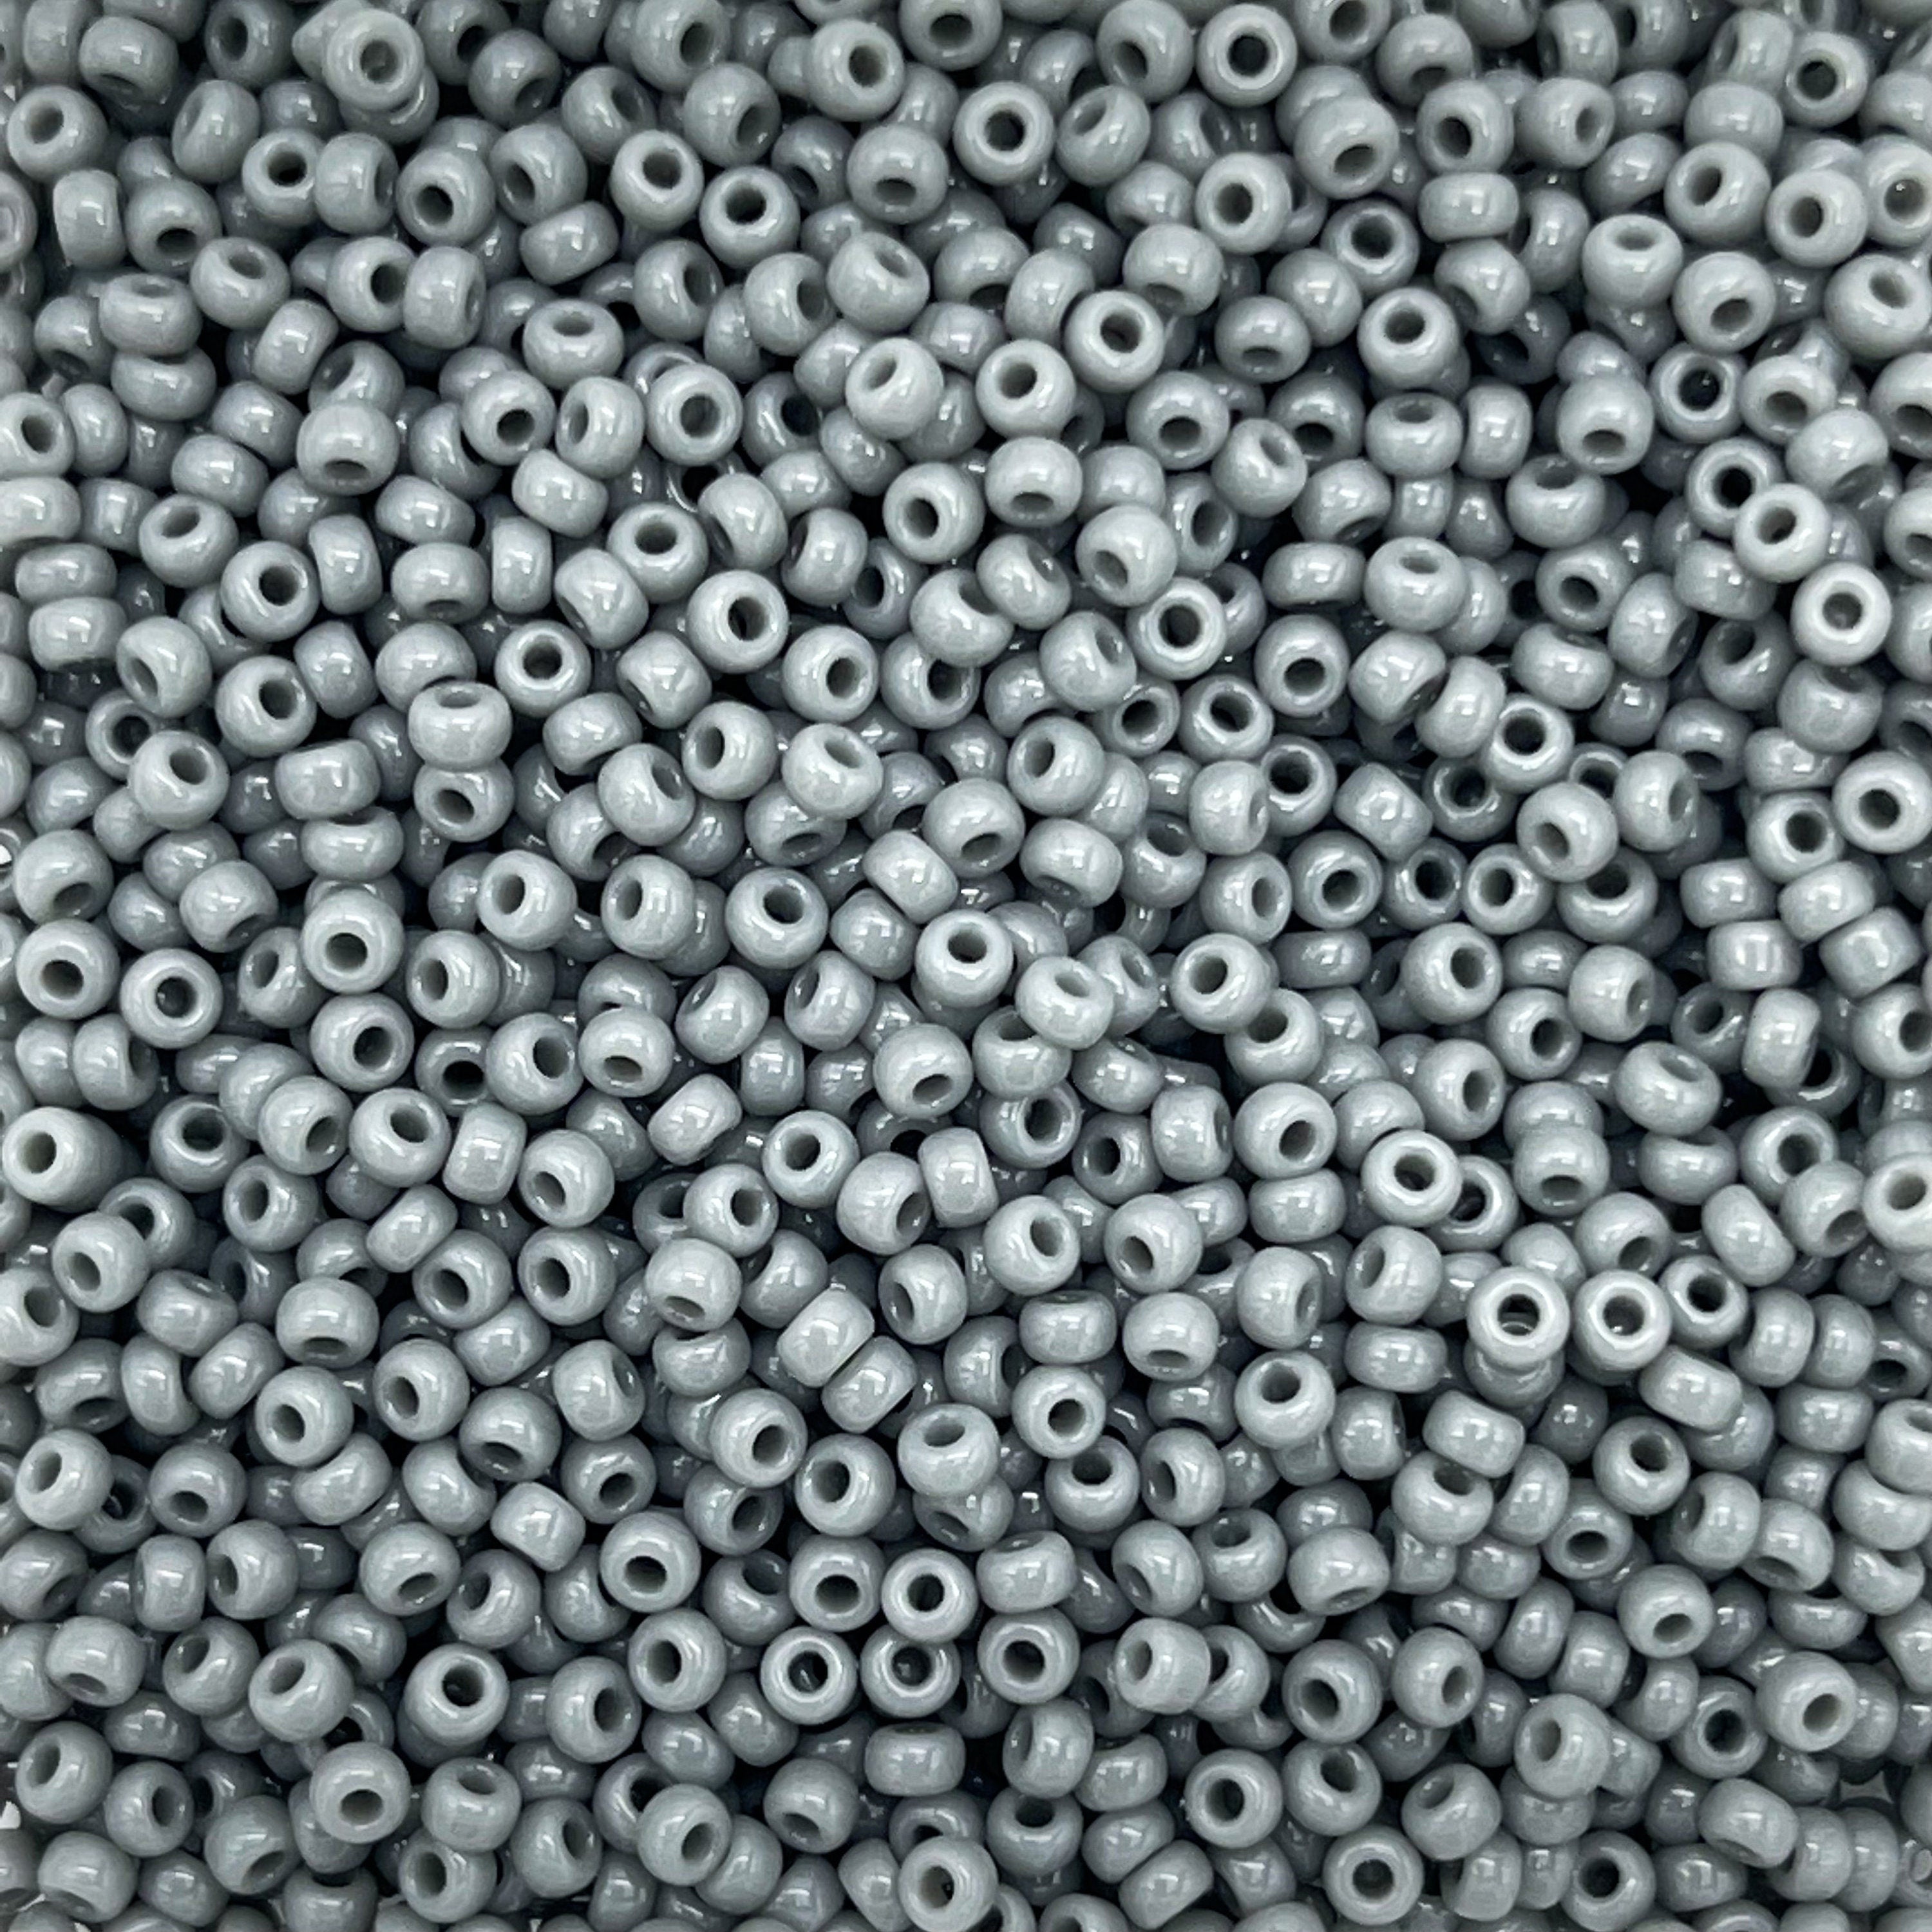 Japanese Glass Seed Beads Size 11/0-416 Opaque Medium Gray